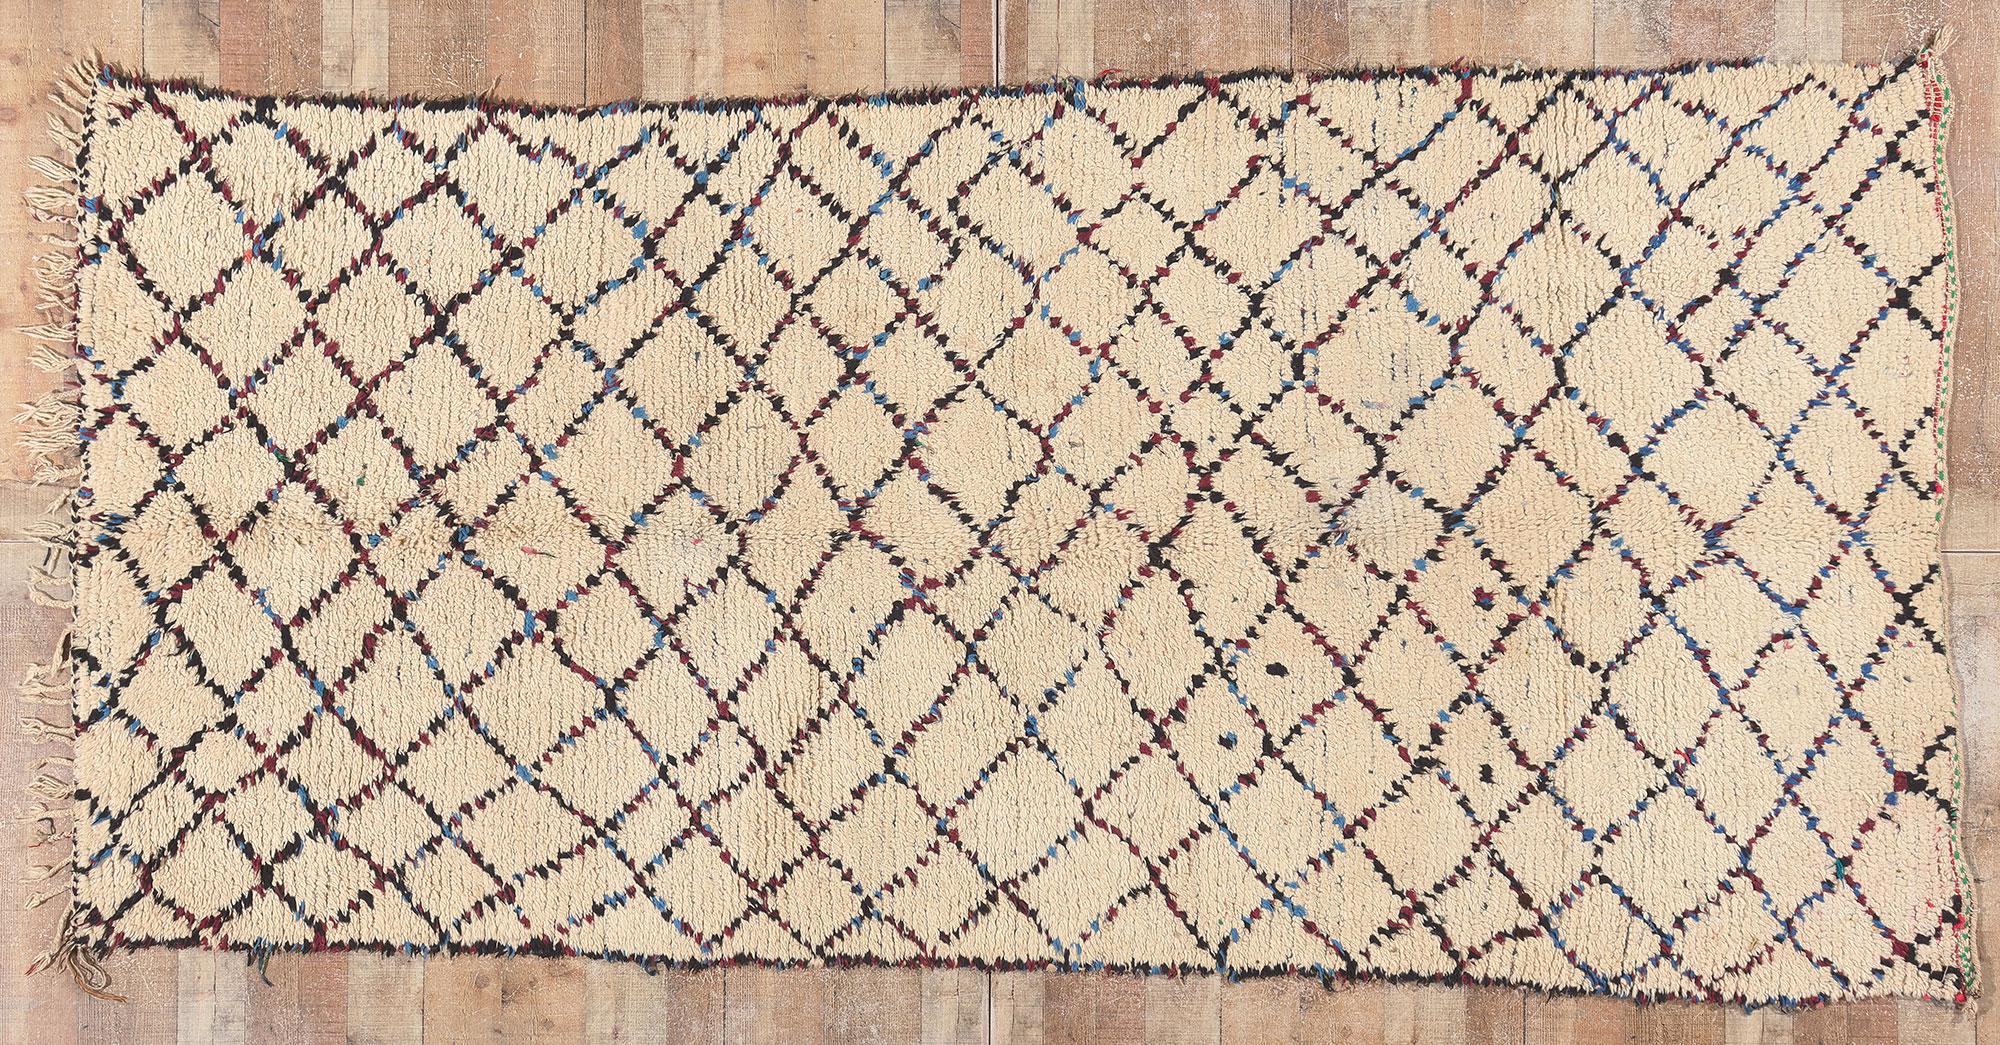 Vintage Boucherouite Moroccan Azilal Rag Rug, Sustainability Meets Cozy Nomad For Sale 2